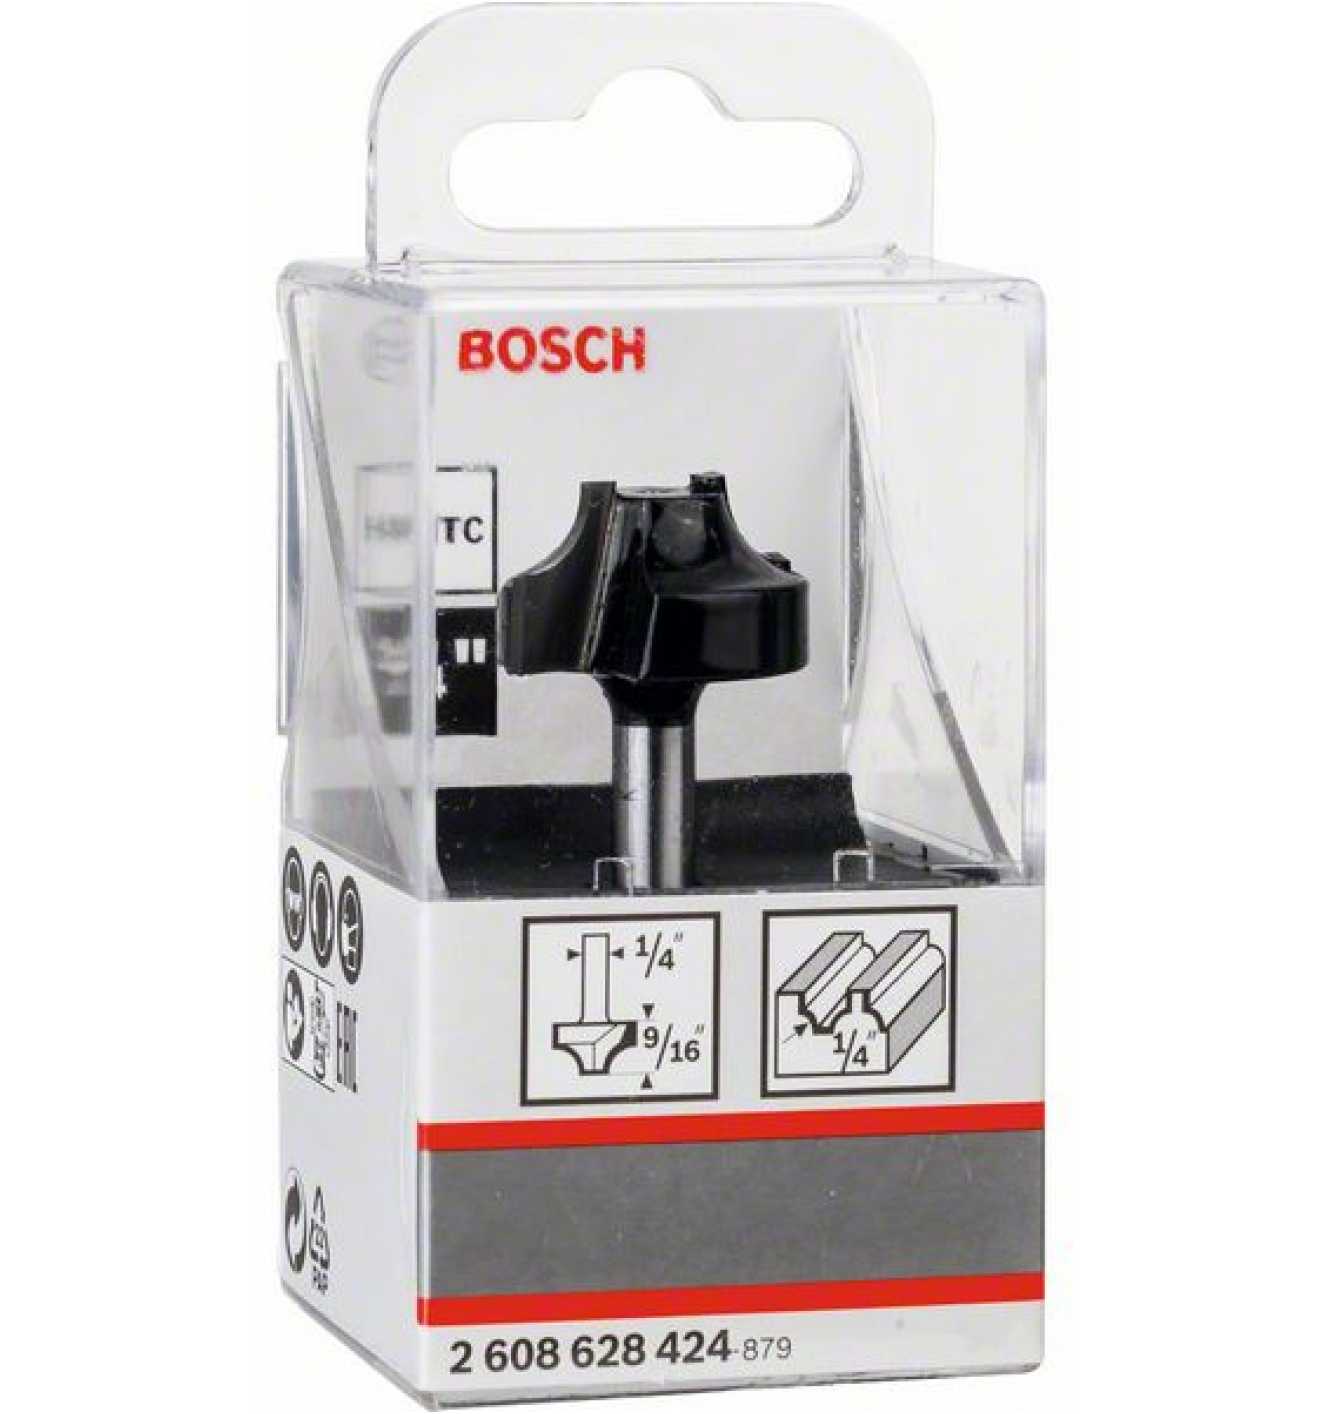 Bosch Edge forming bit E, 1/4", R1 6.3 mm, D 25.4 mm, L 14 mm, G 46 mm 2608628424 Power Tool Services